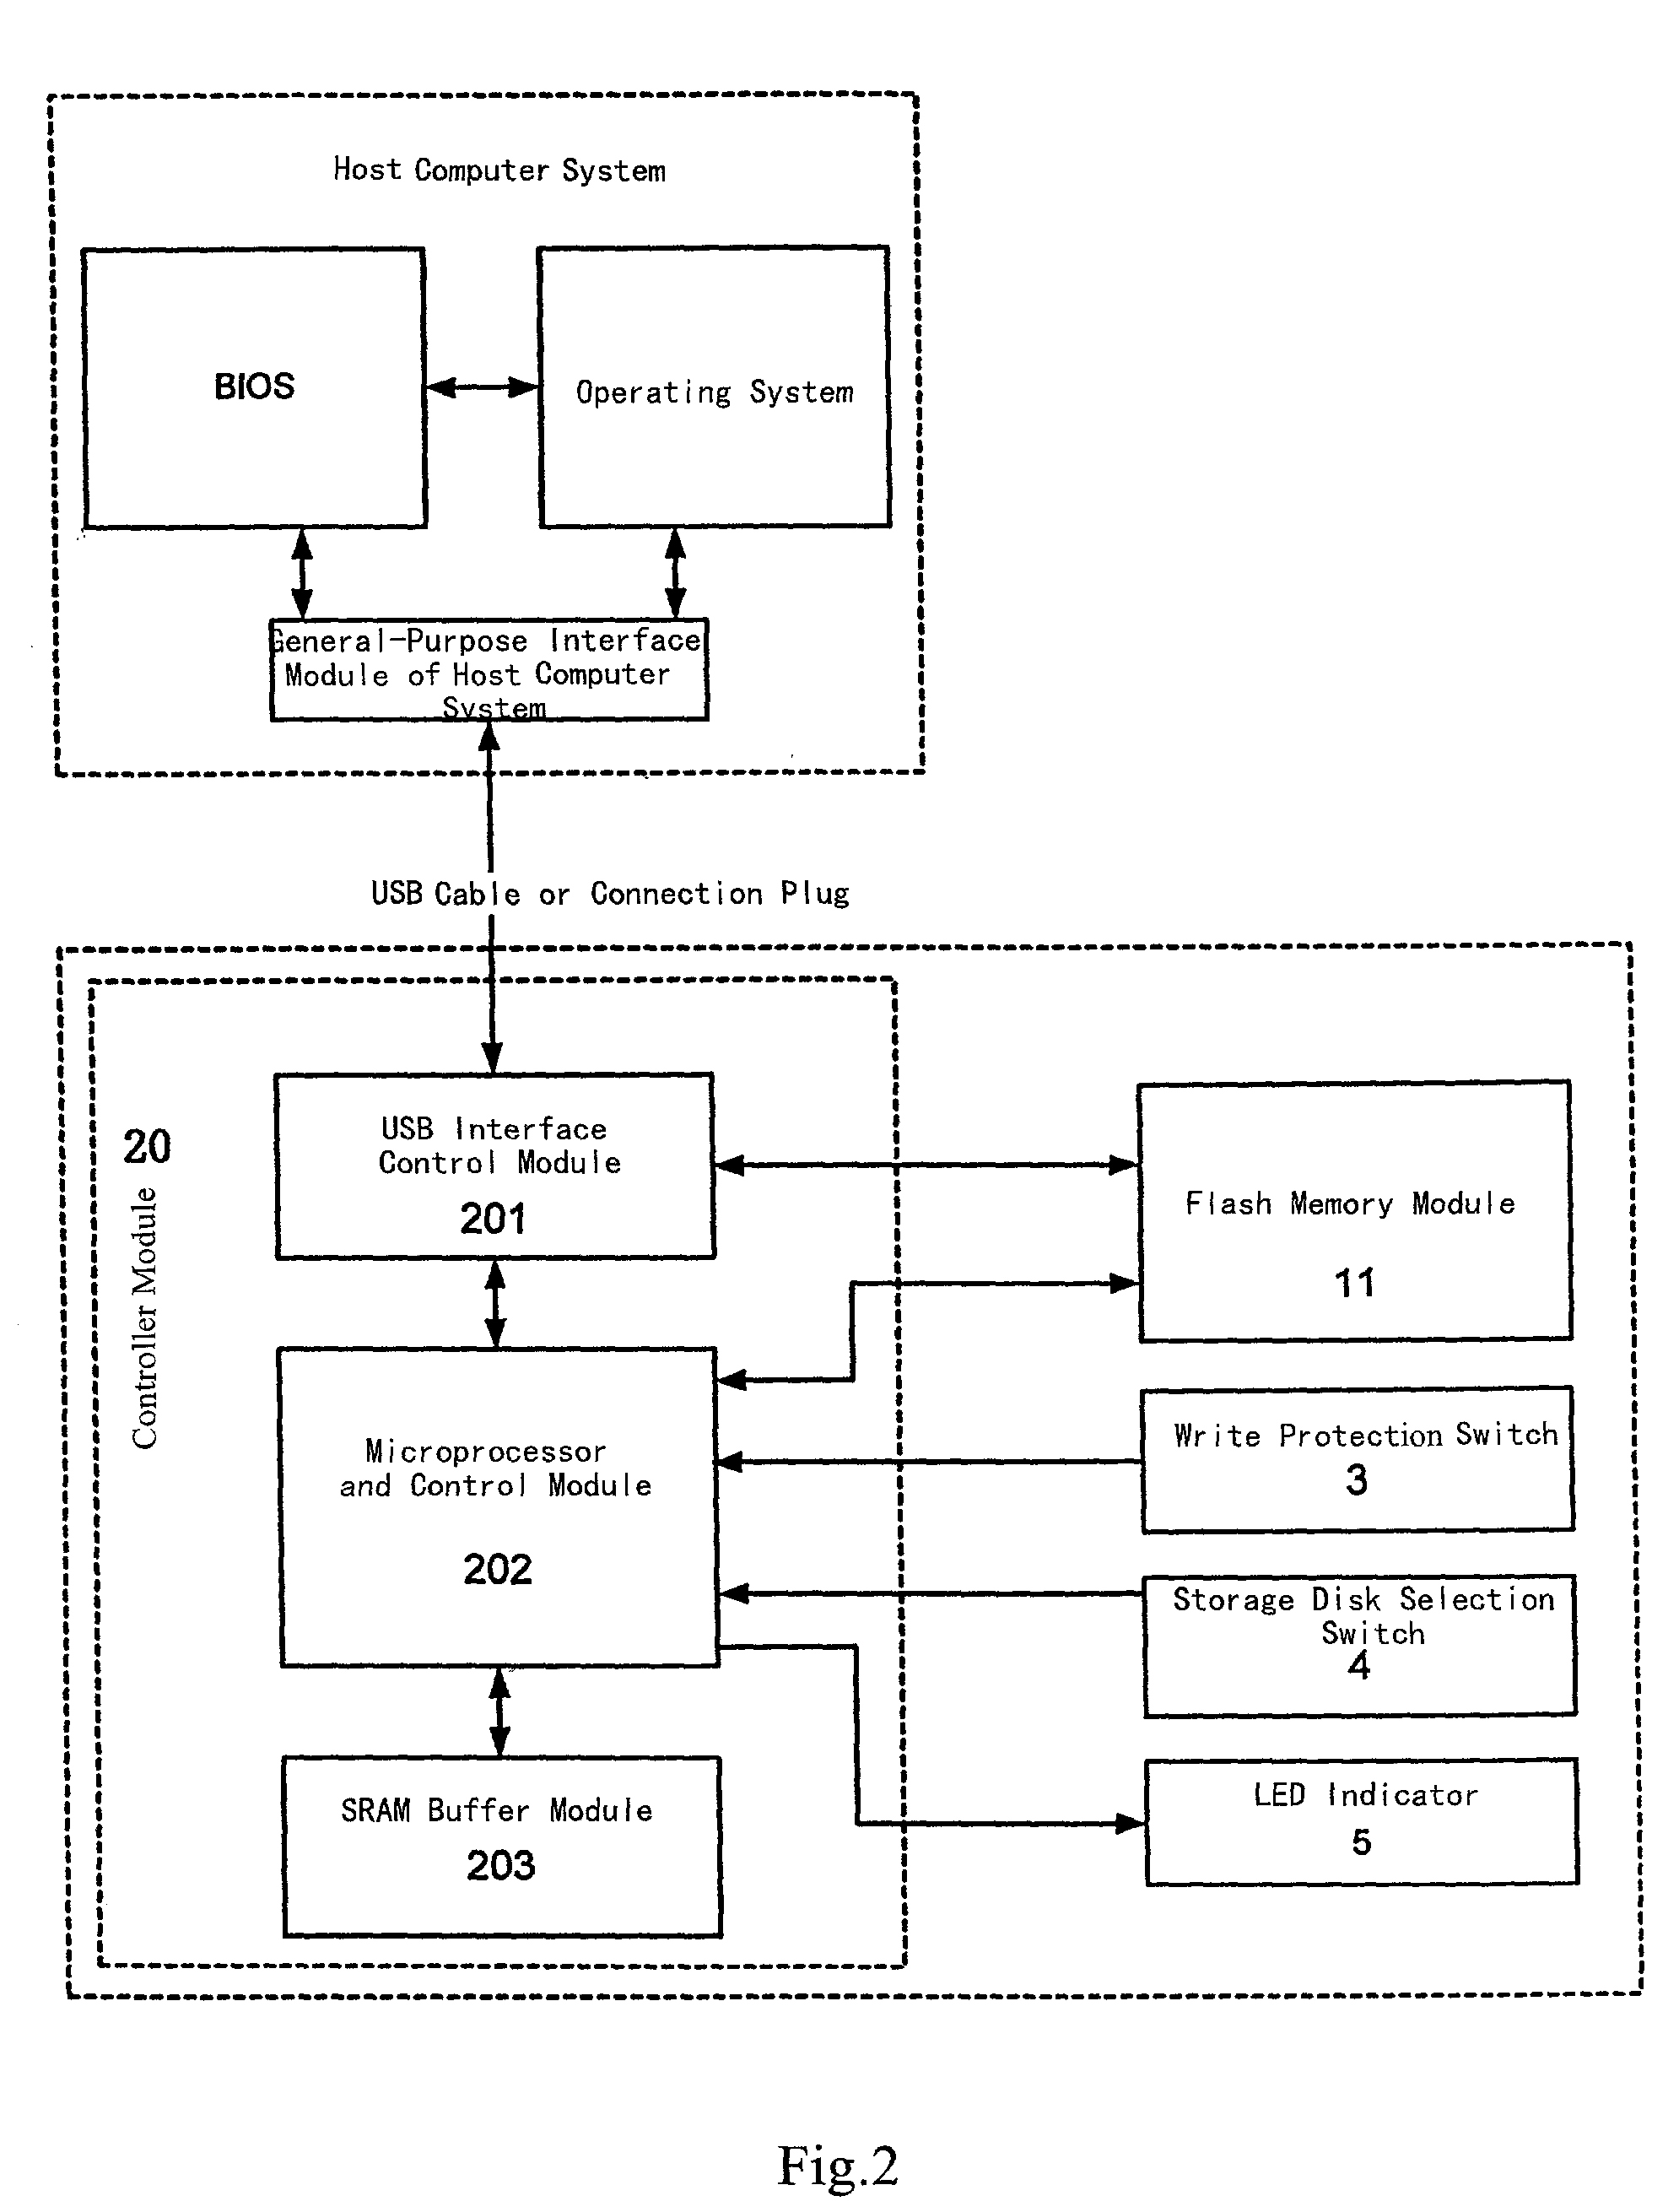 Multifunction semiconductor storage device and a method for booting-up computer host